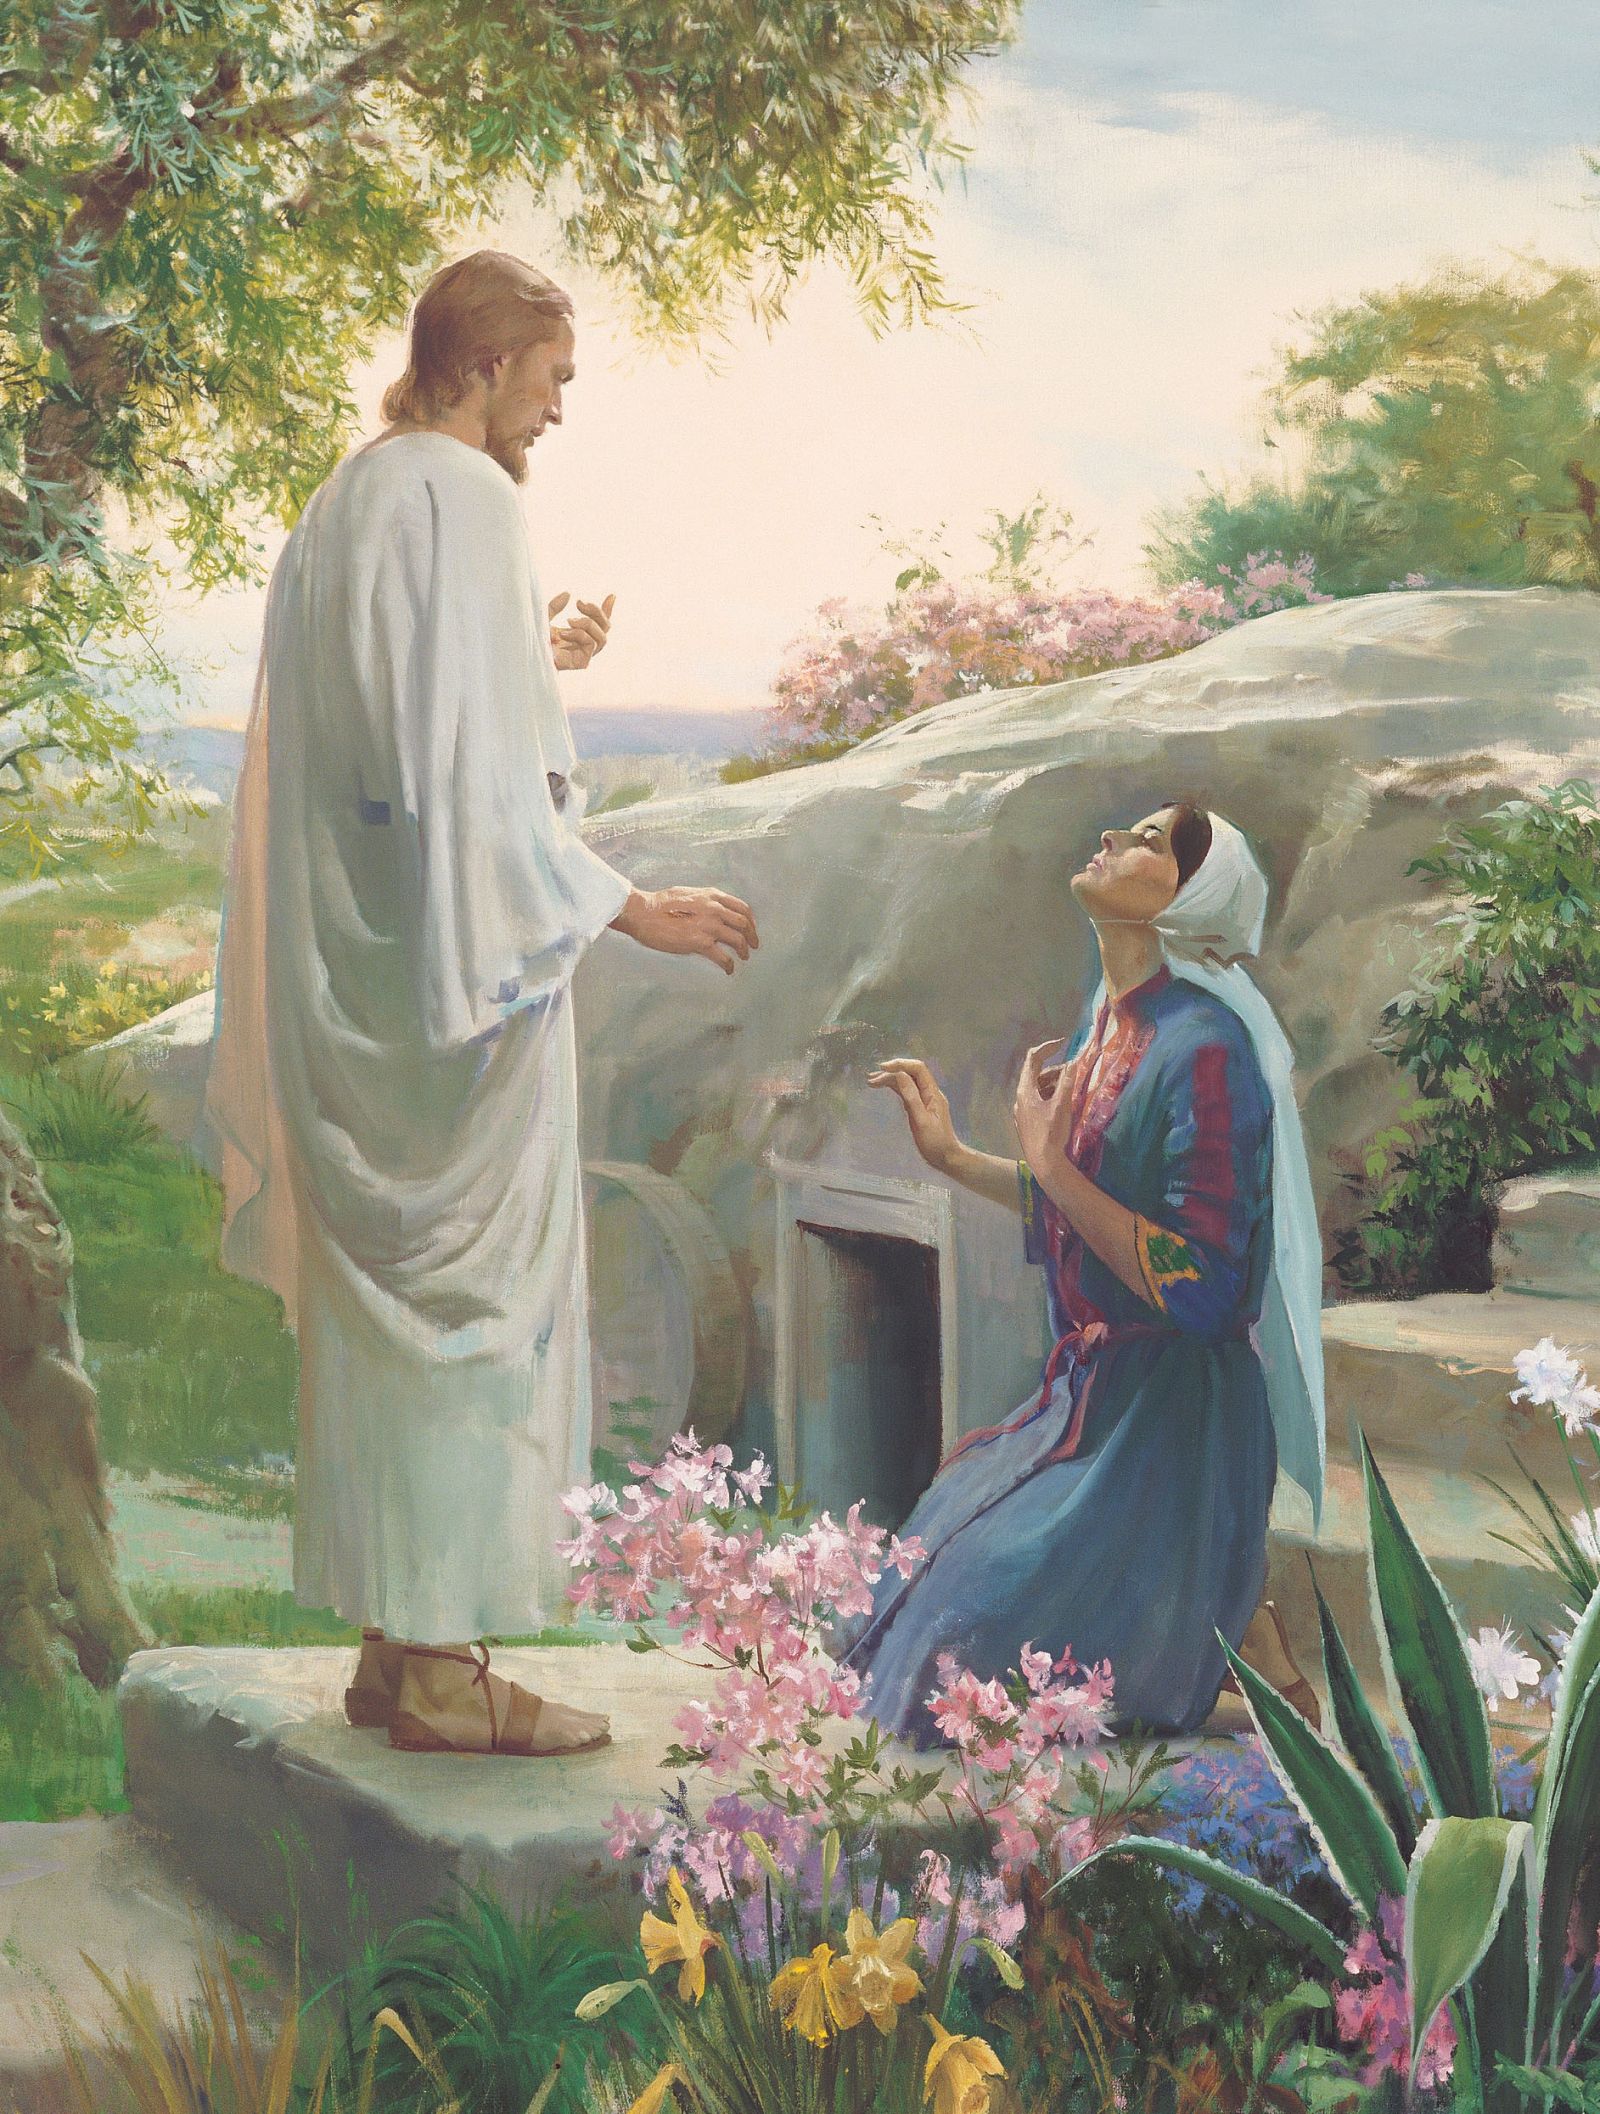 'Mary and the Resurrected Lord' by Harry Anderson